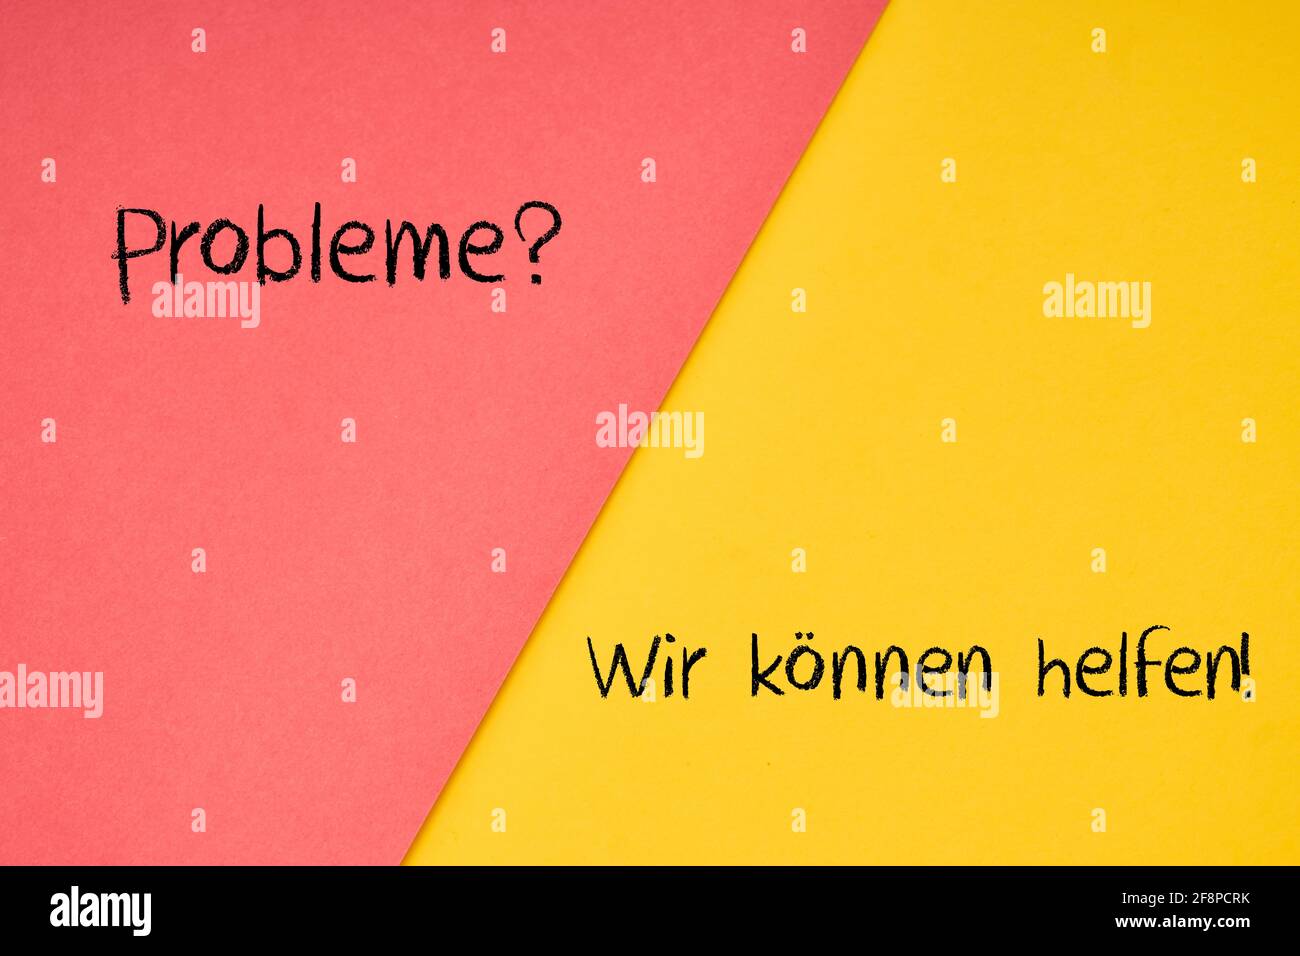 Red and yellow background 'Probleme? - Problems? / Wir konnen helfen! - We can help!' Stock Photo